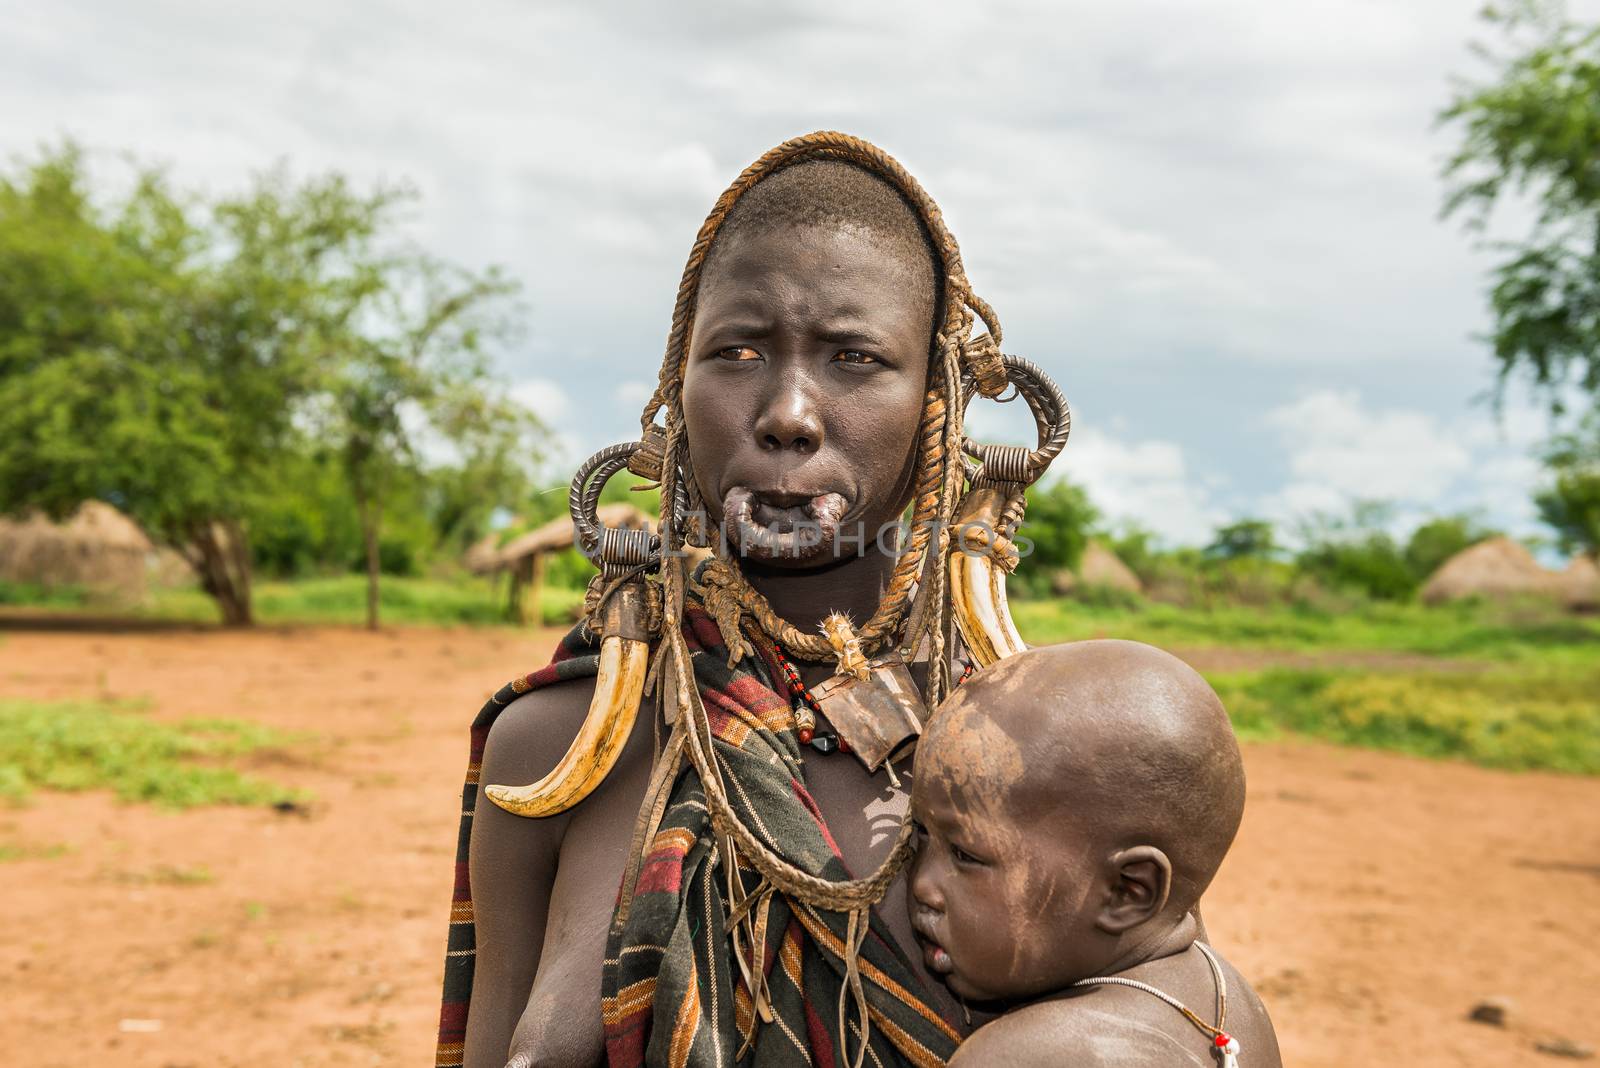 Woman from the african tribe Mursi with her baby, Ethiopia by nickfox